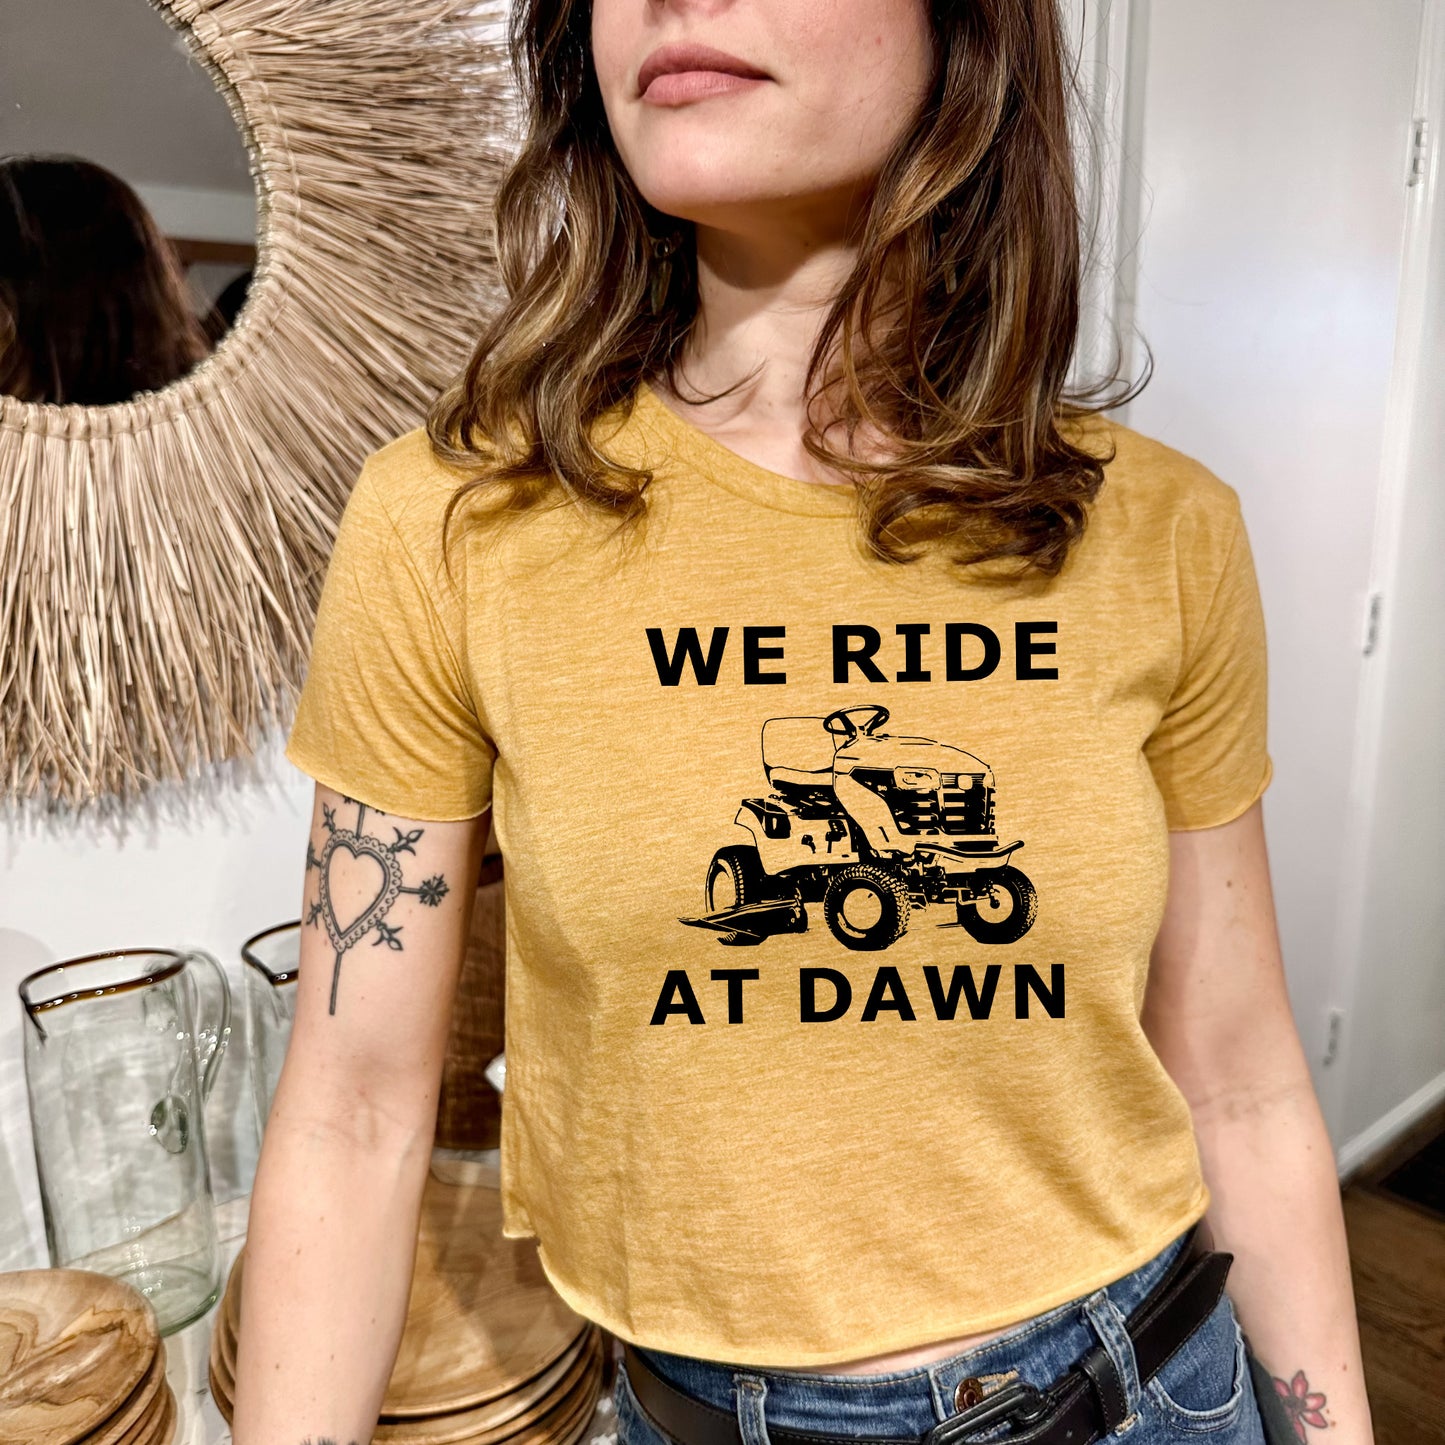 We Ride At Dawn - Women's Crop Tee - Heather Gray or Gold